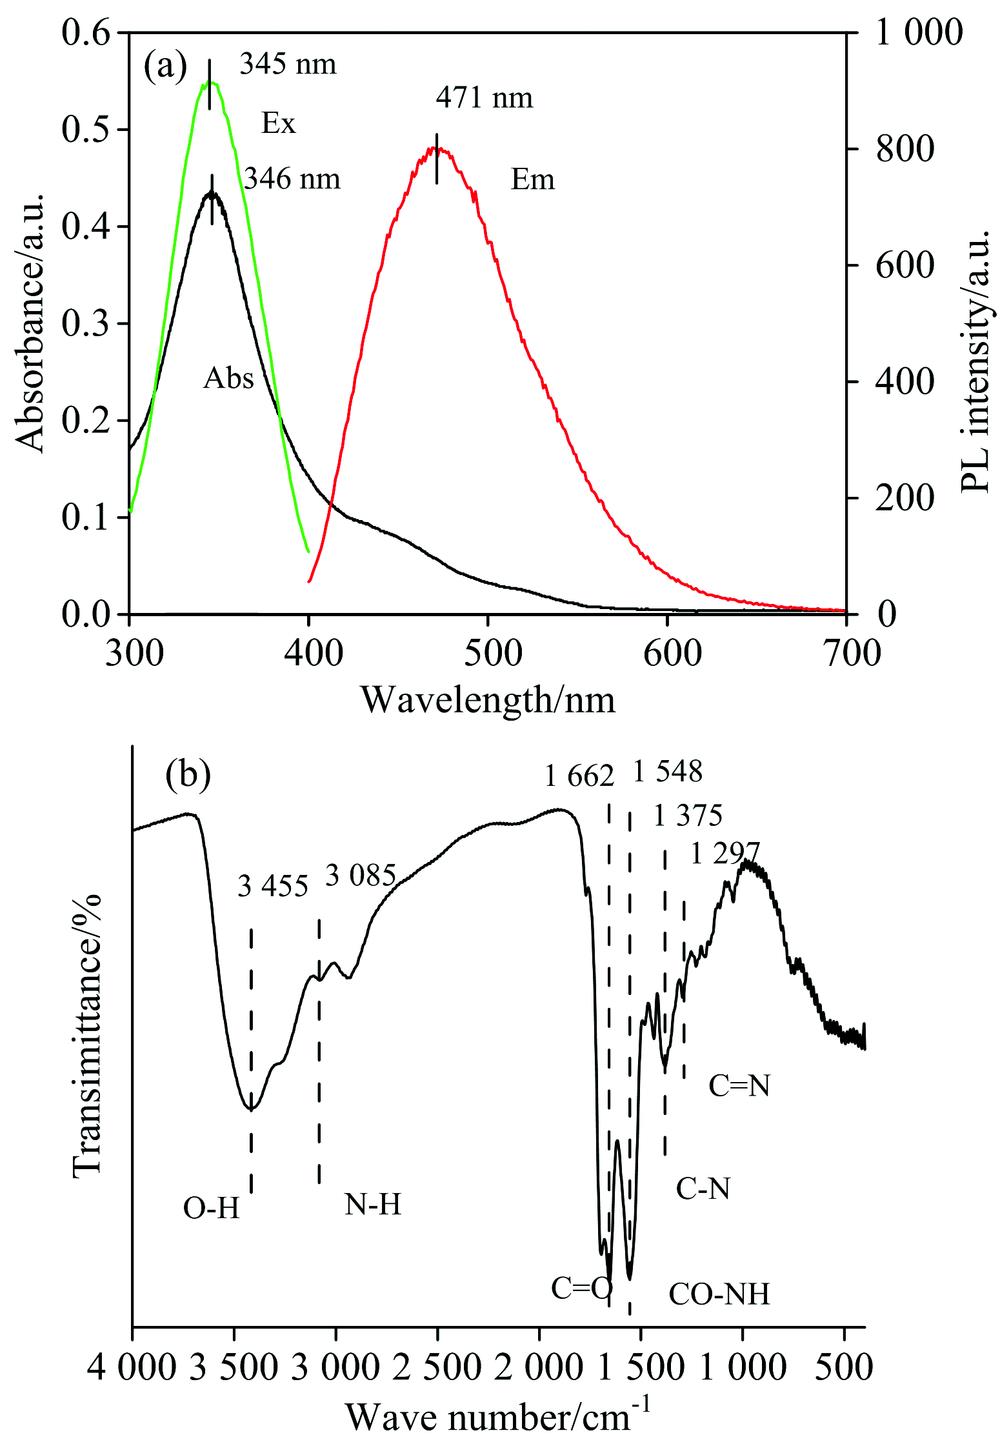 (a) The UV-Visible spectrum, excitation and emission spectrum of CDs; (b) The FT-IR spectrum of CDs